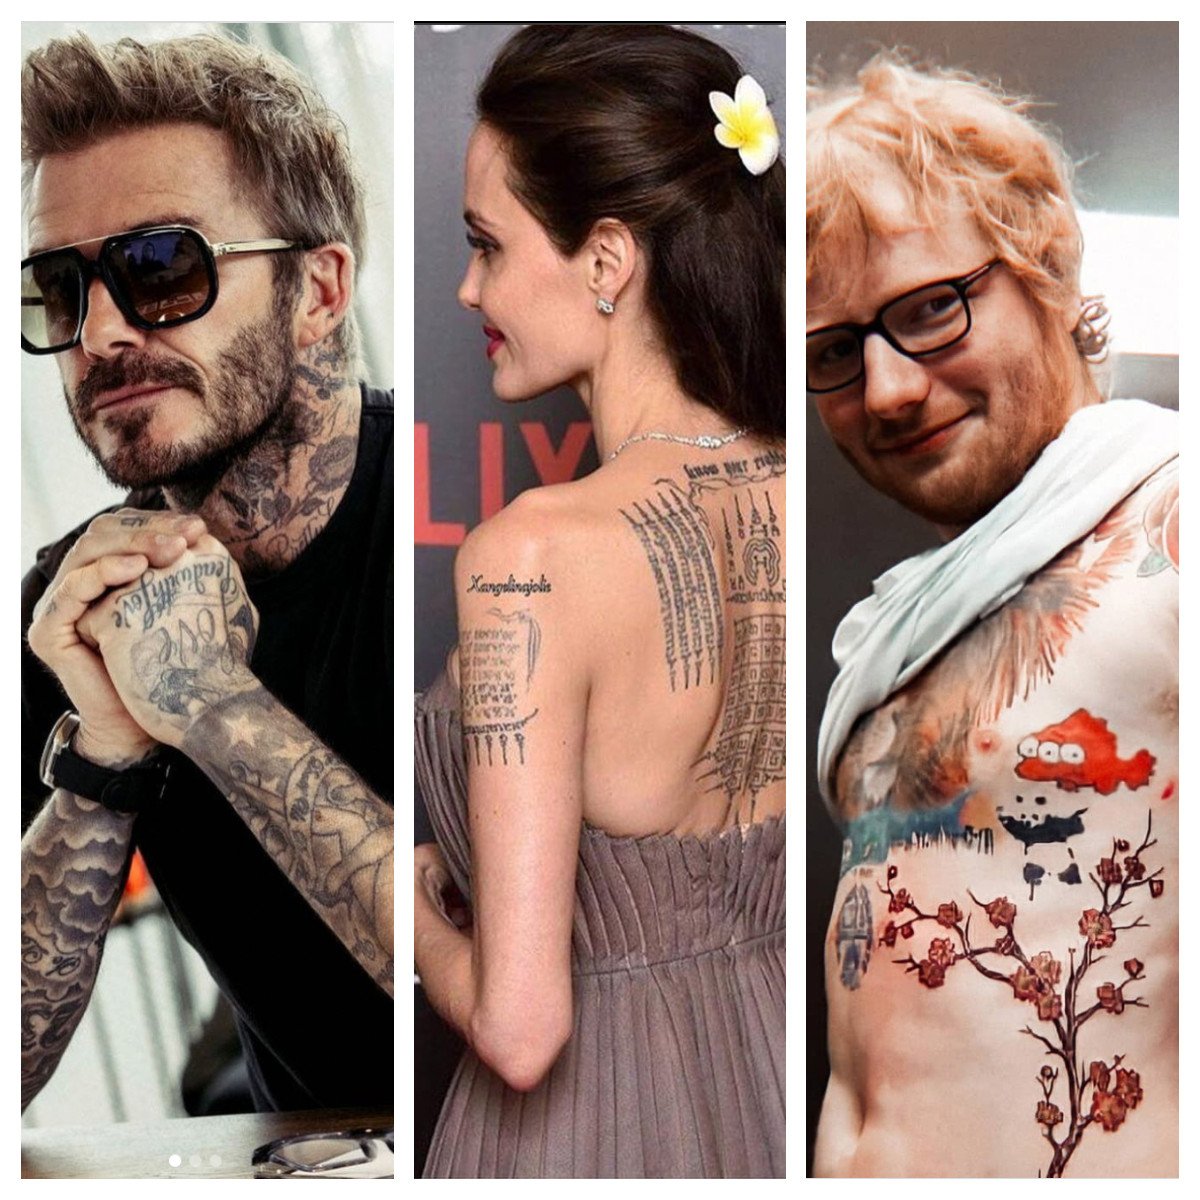 25 Tattoo Cover-Up Ideas for Those Who Need a Change